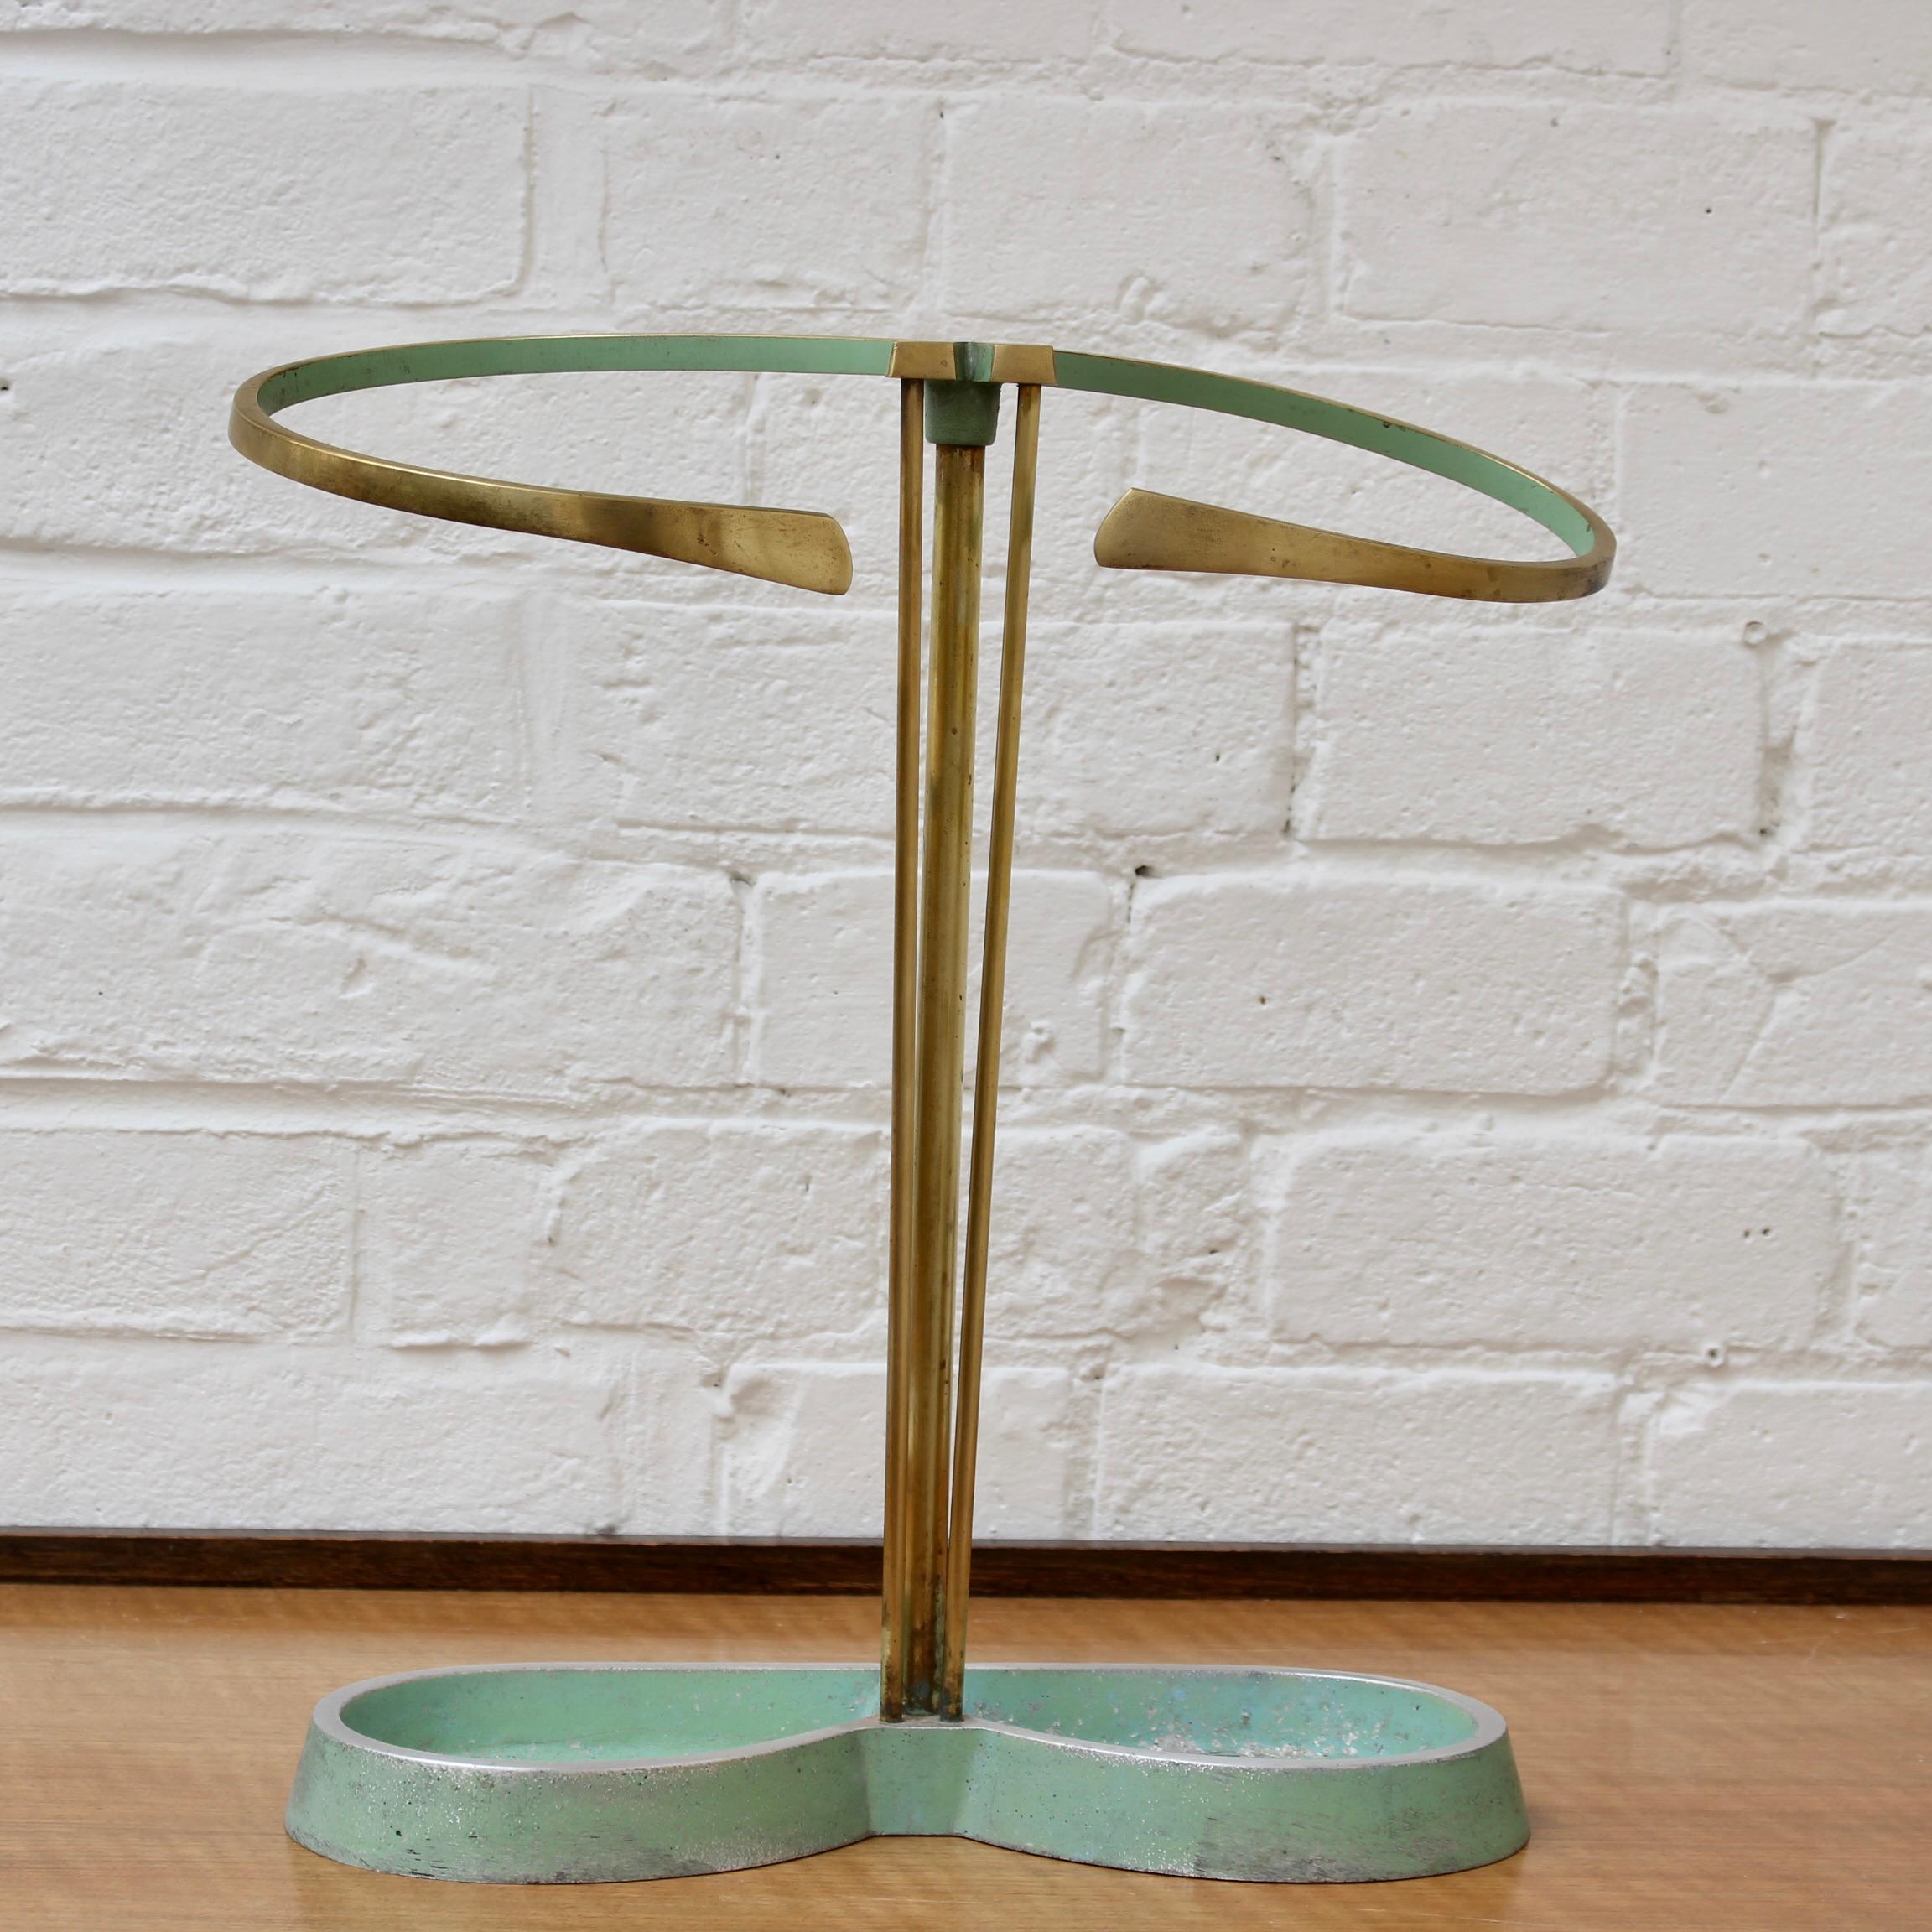 Elegant, Mid-Century Modern brass umbrella stand with cast aluminium foot (circa 1950s). Beautifully curvaceous design and charming pistachio green (not verdigris) highlights for those who love characterful Mid-Century vintage. This umbrella stand